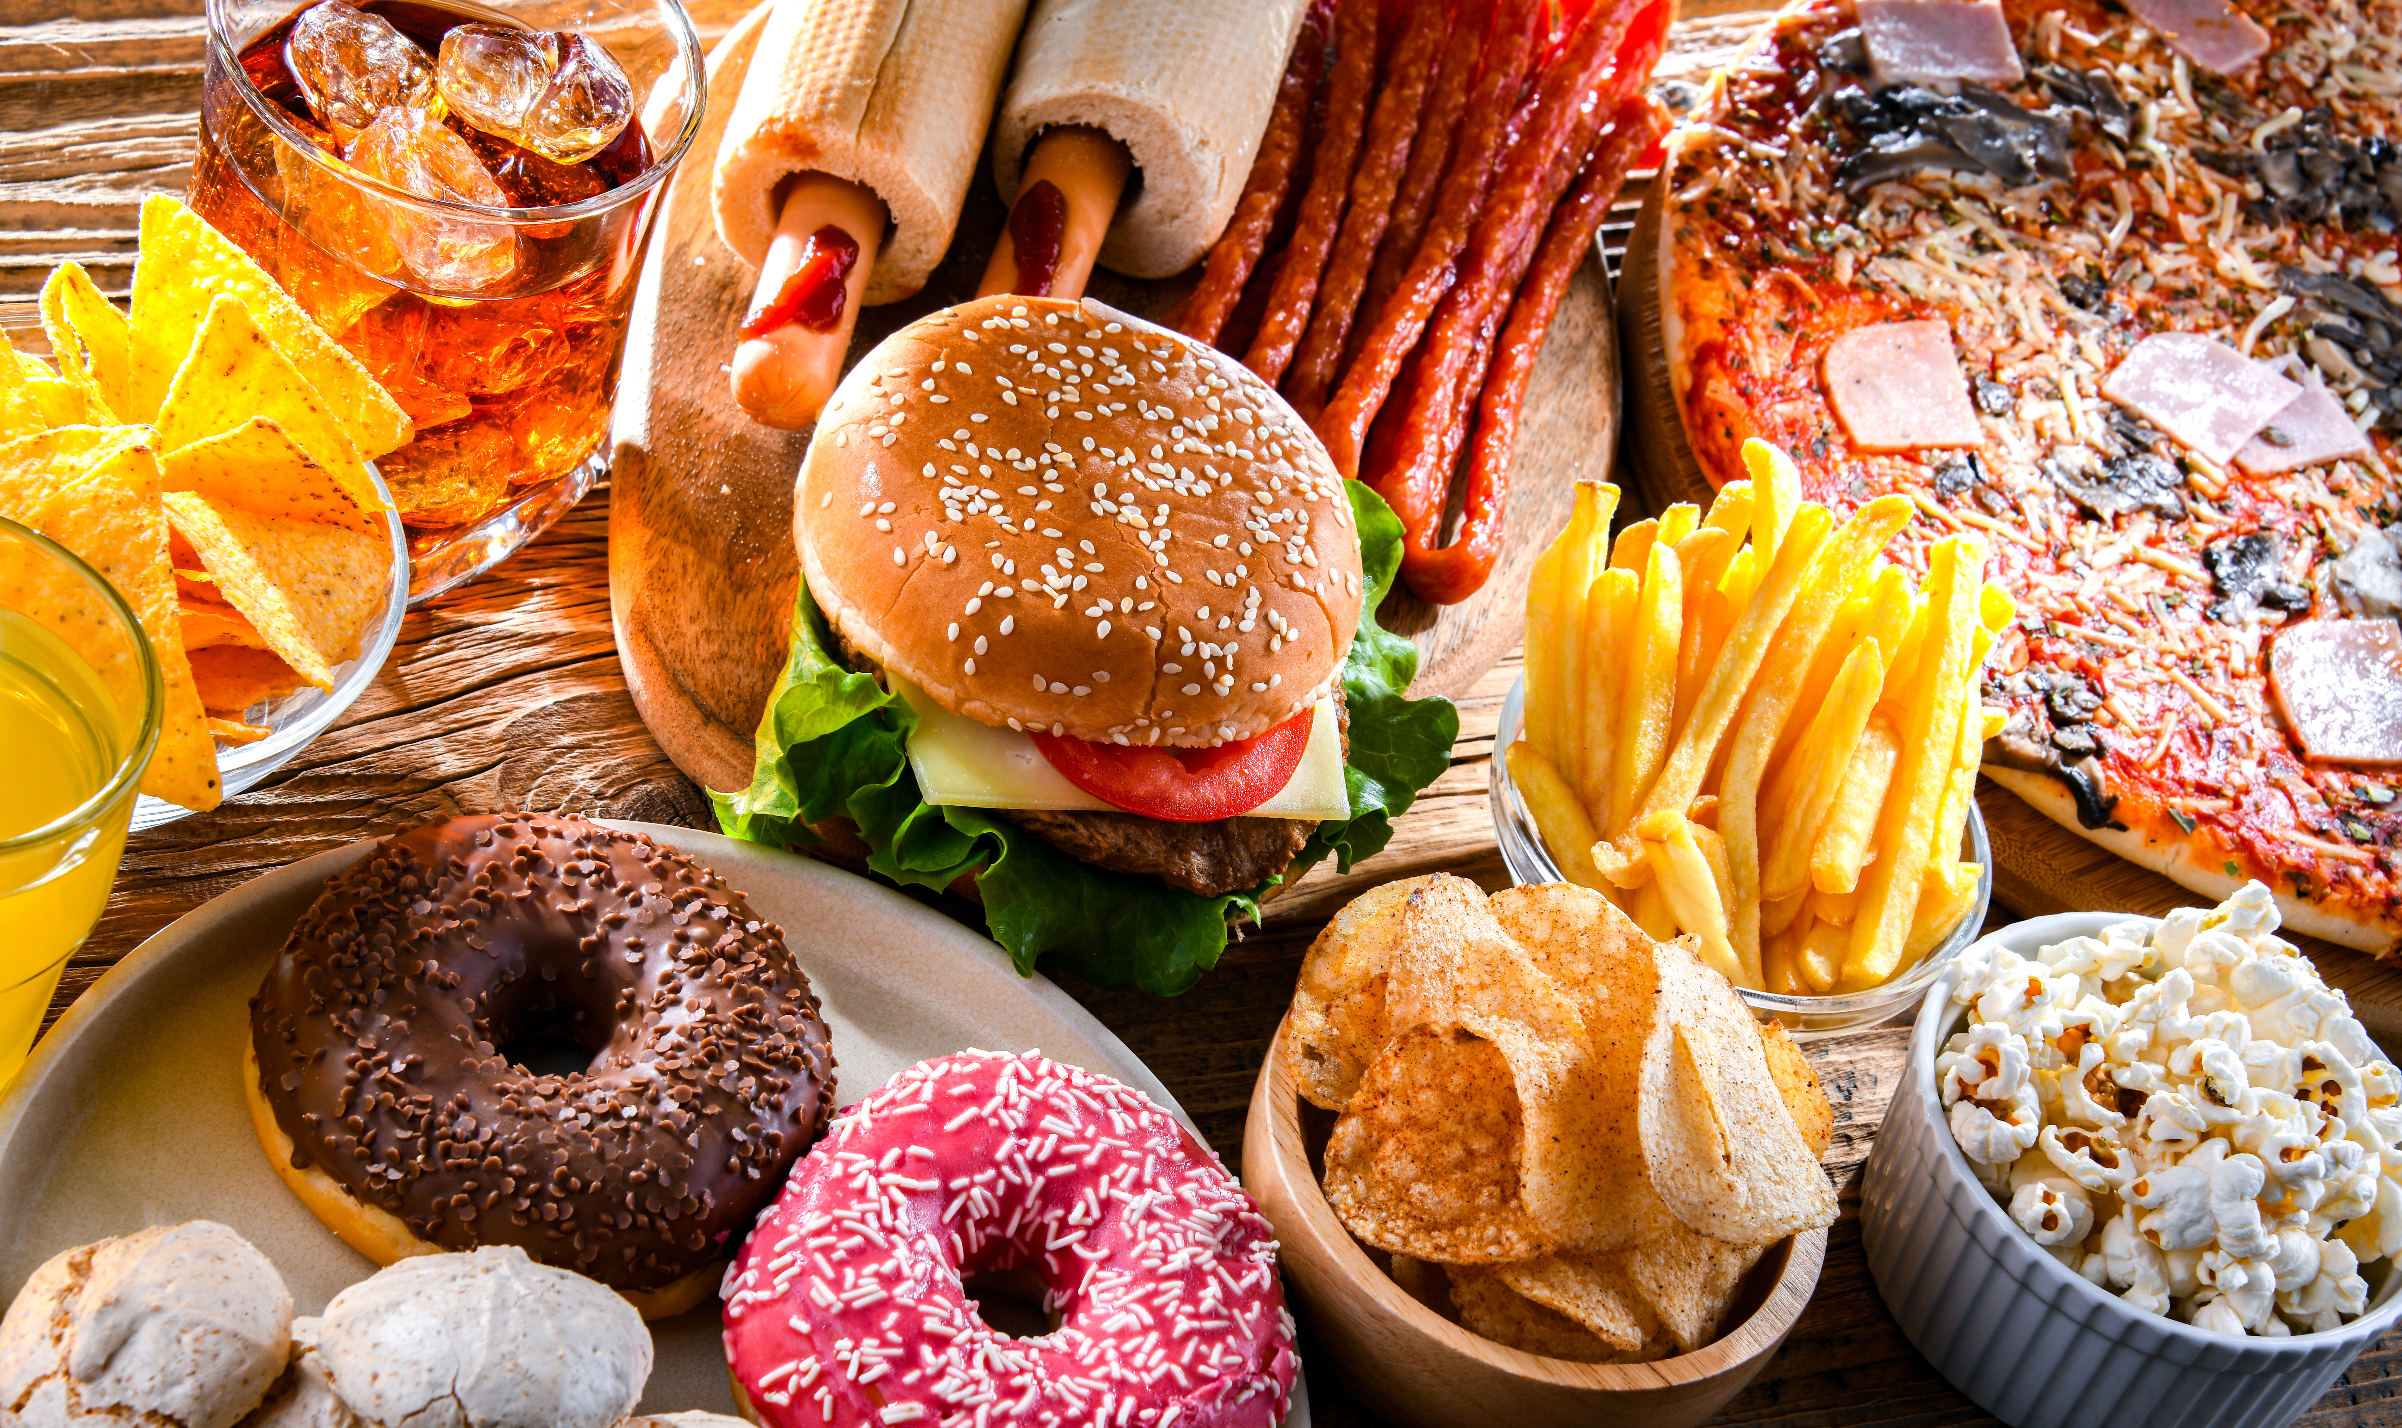 An array of various junk foods like donuts, burgers, chips and pop